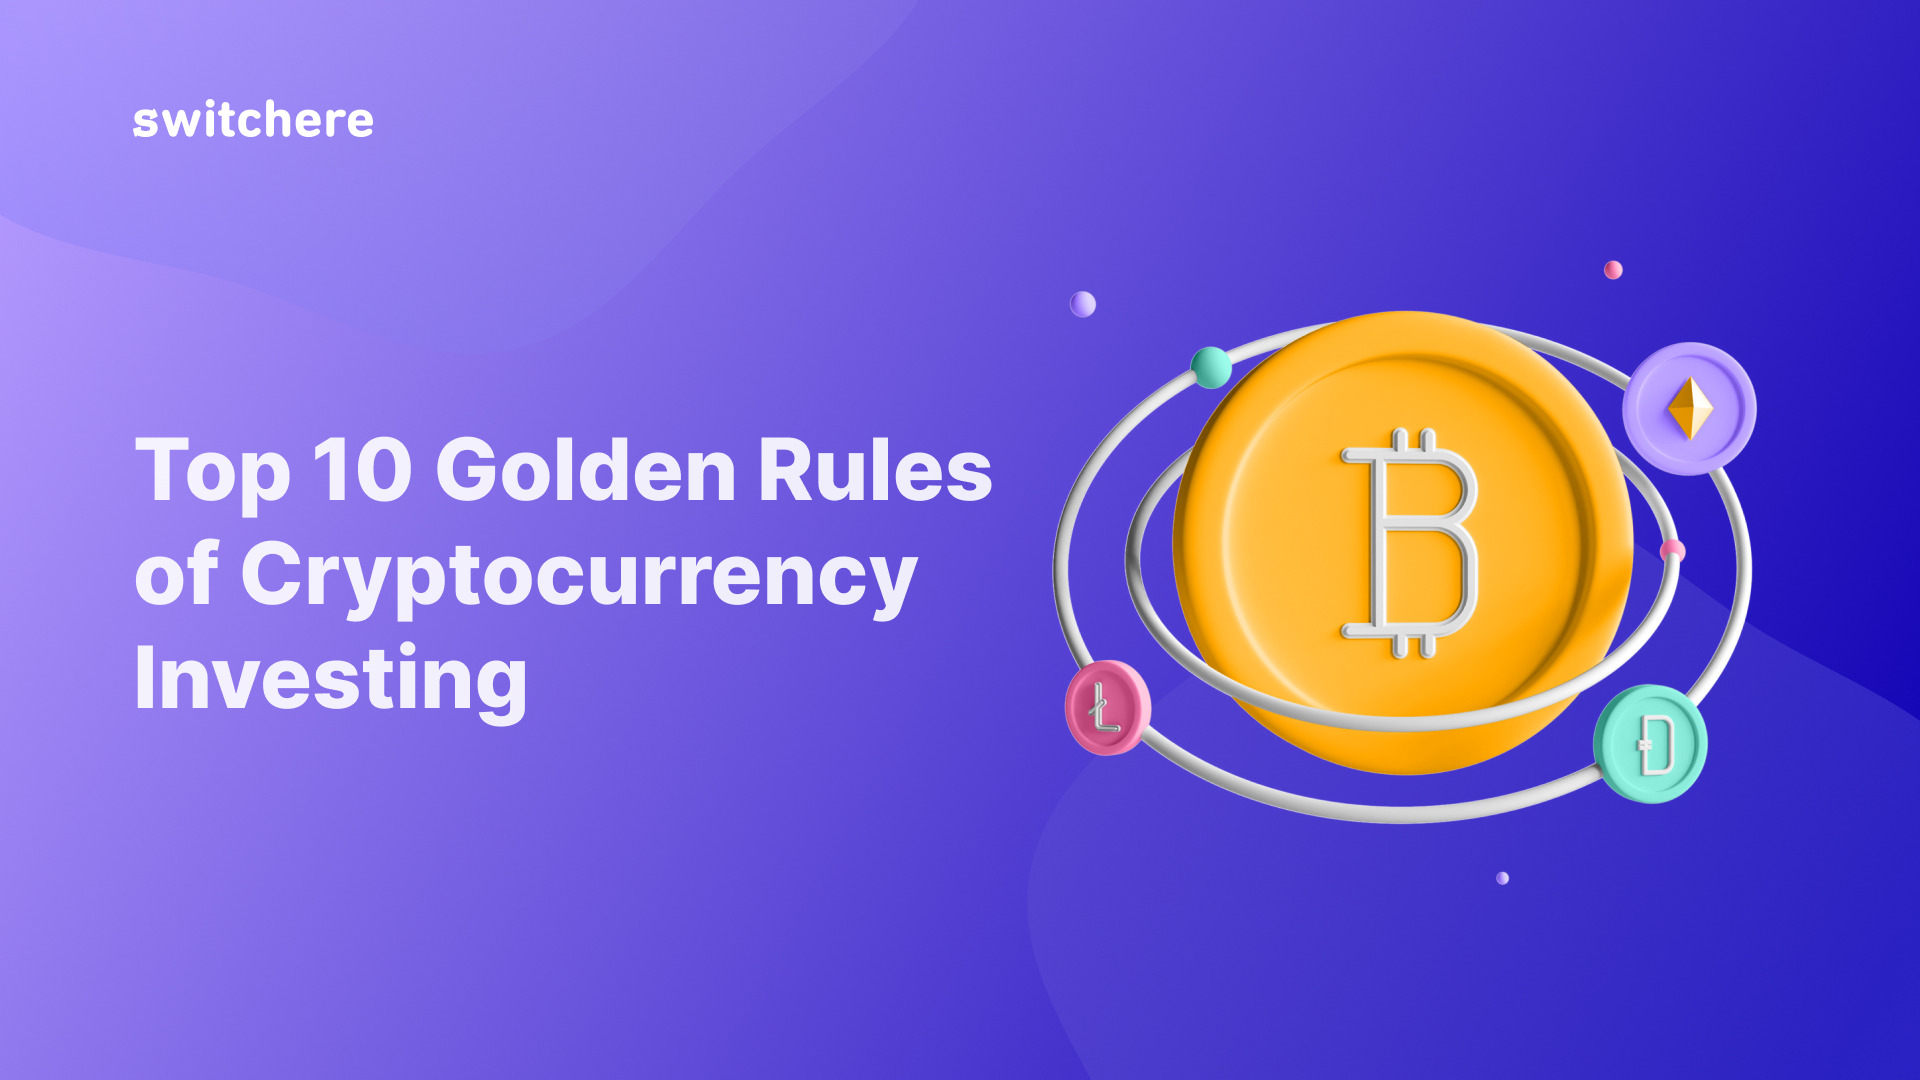 Top 10 Golden Rules of Cryptocurrency Investing